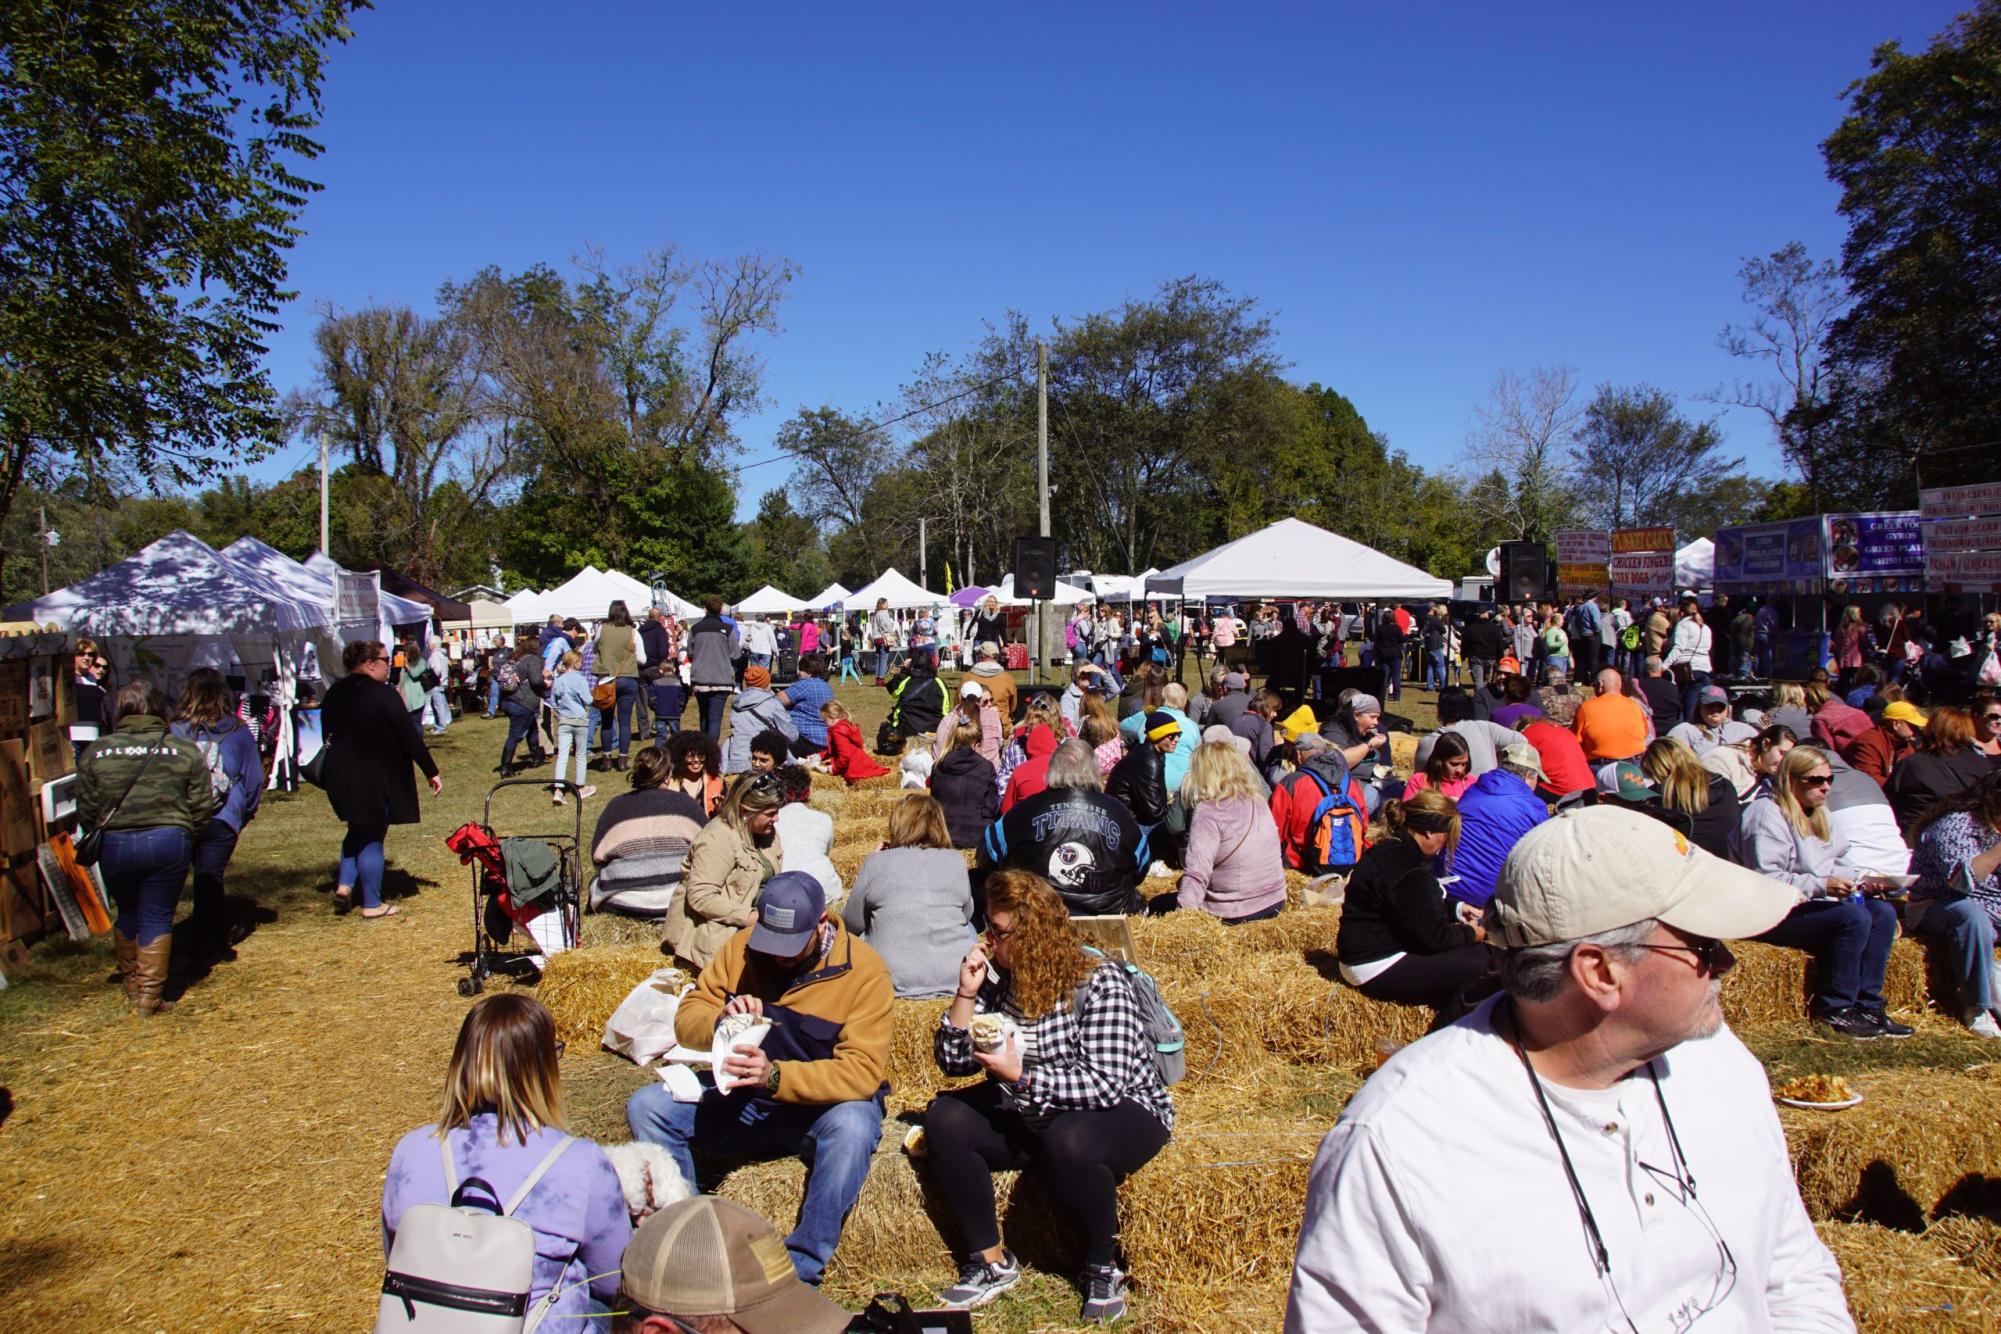 The profound Bell Buckle Arts and Crafts Festival will take place this weekend